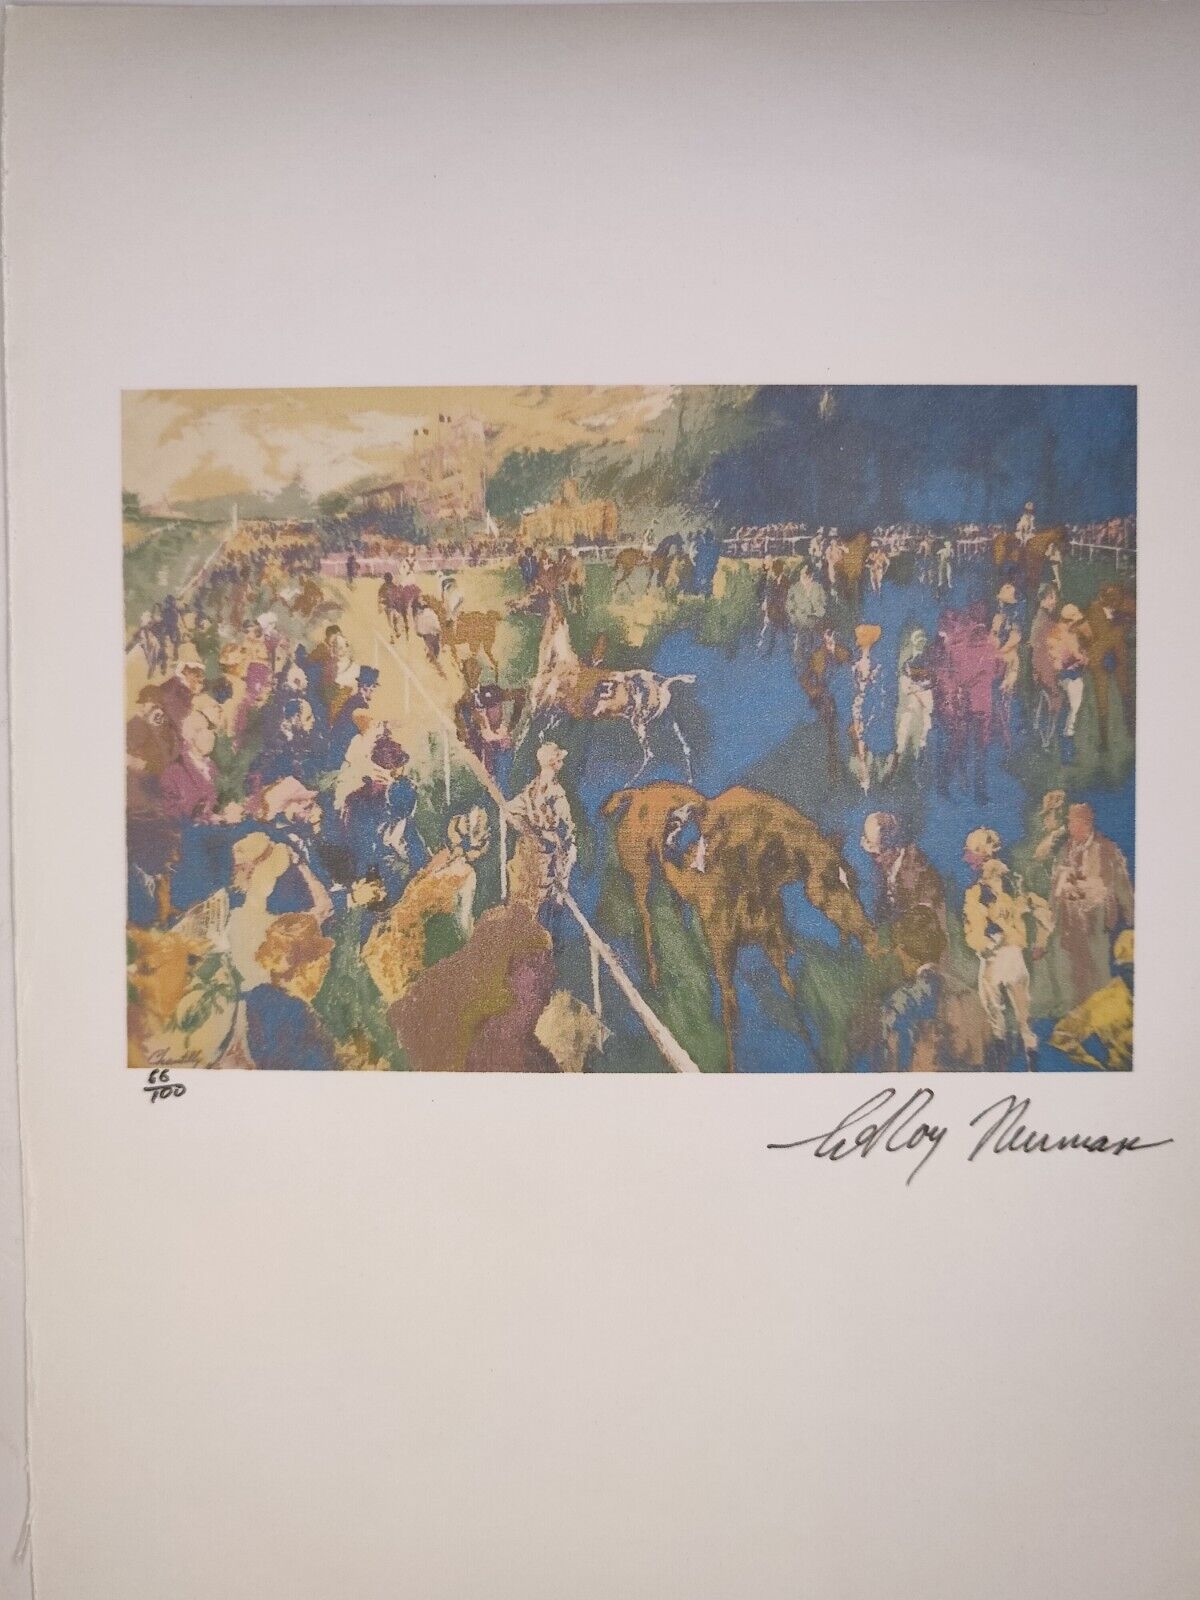 LeRoy Neiman Painting Print Poster Wall Art Signed & Numbered